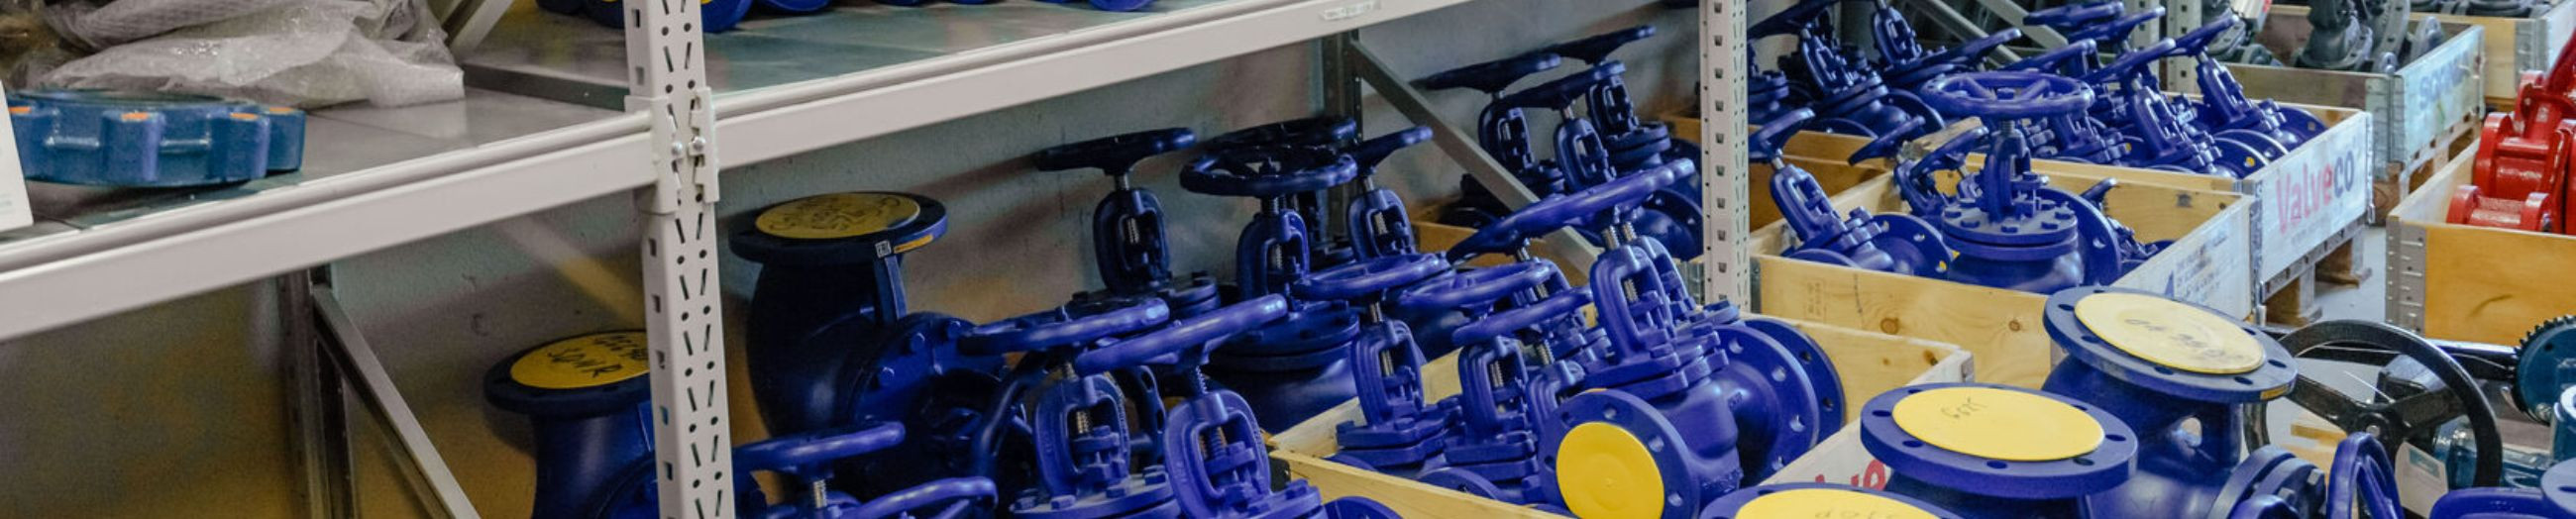 We supply certified industrial valves and automation solutions to enhance system performance and reliability.